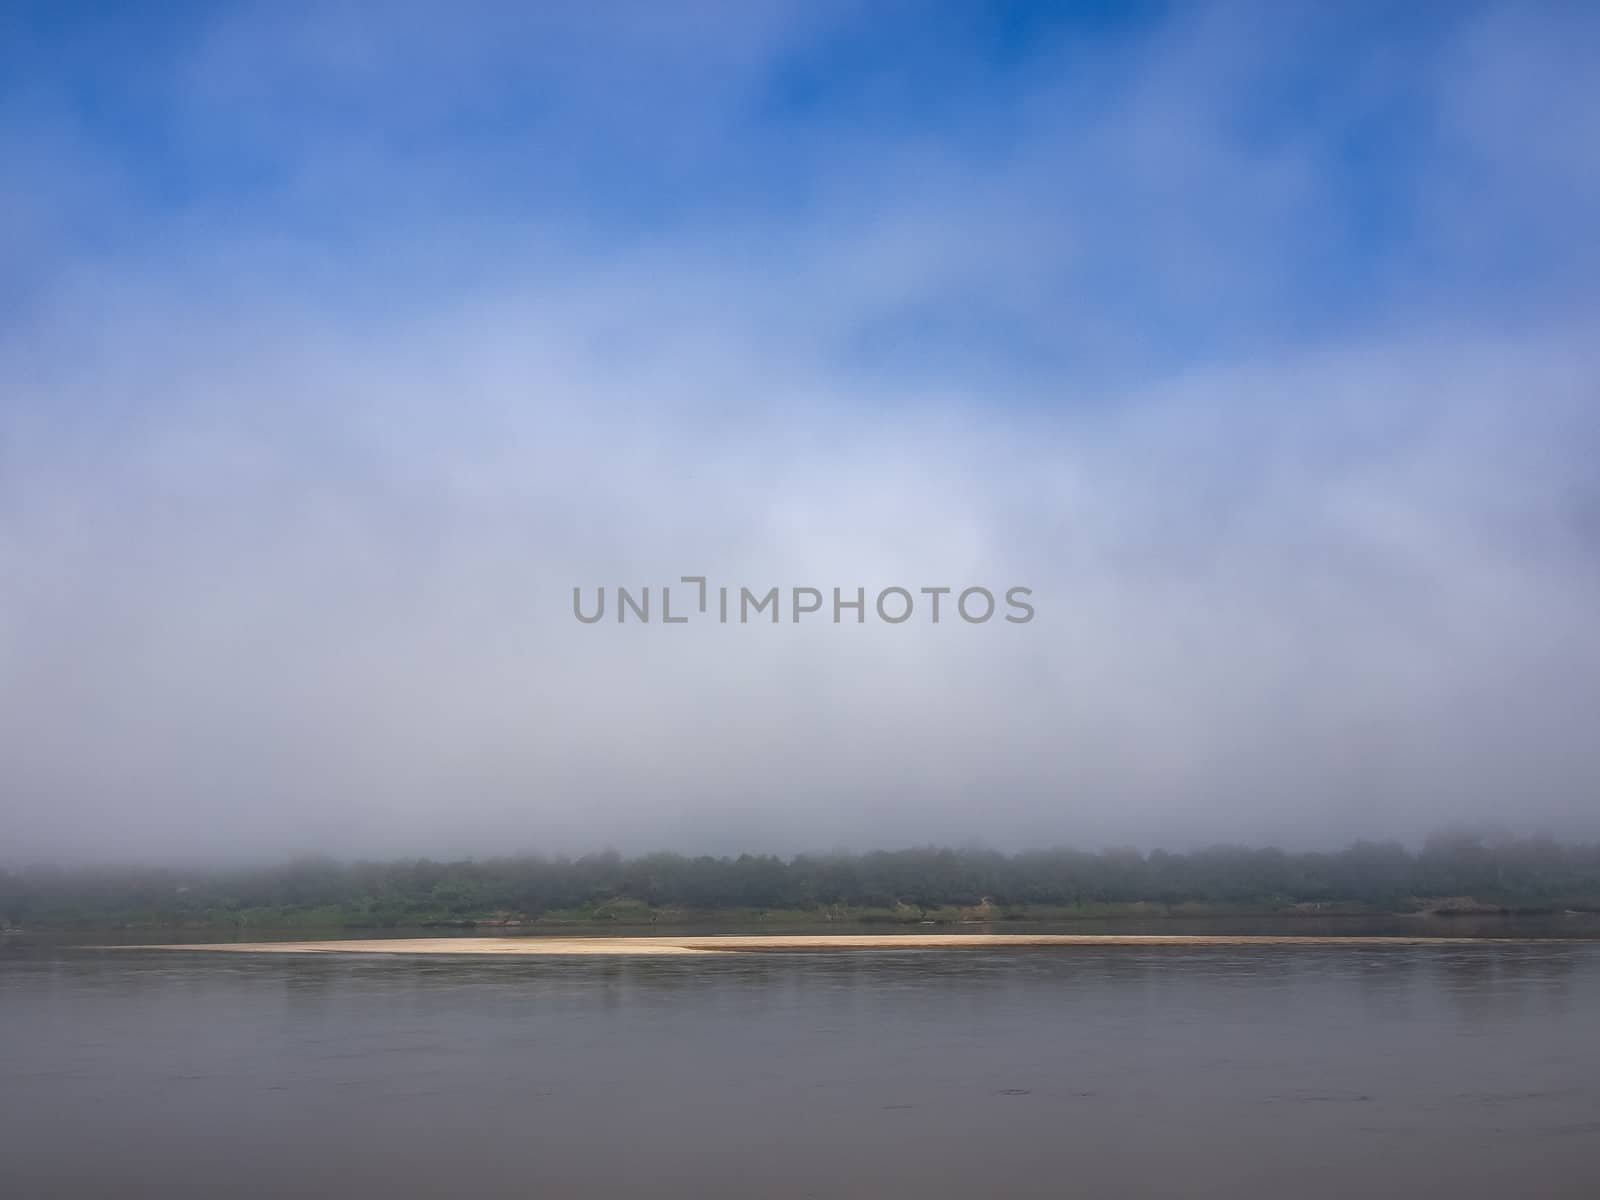 Sand bar of the Mekong River in the mist.